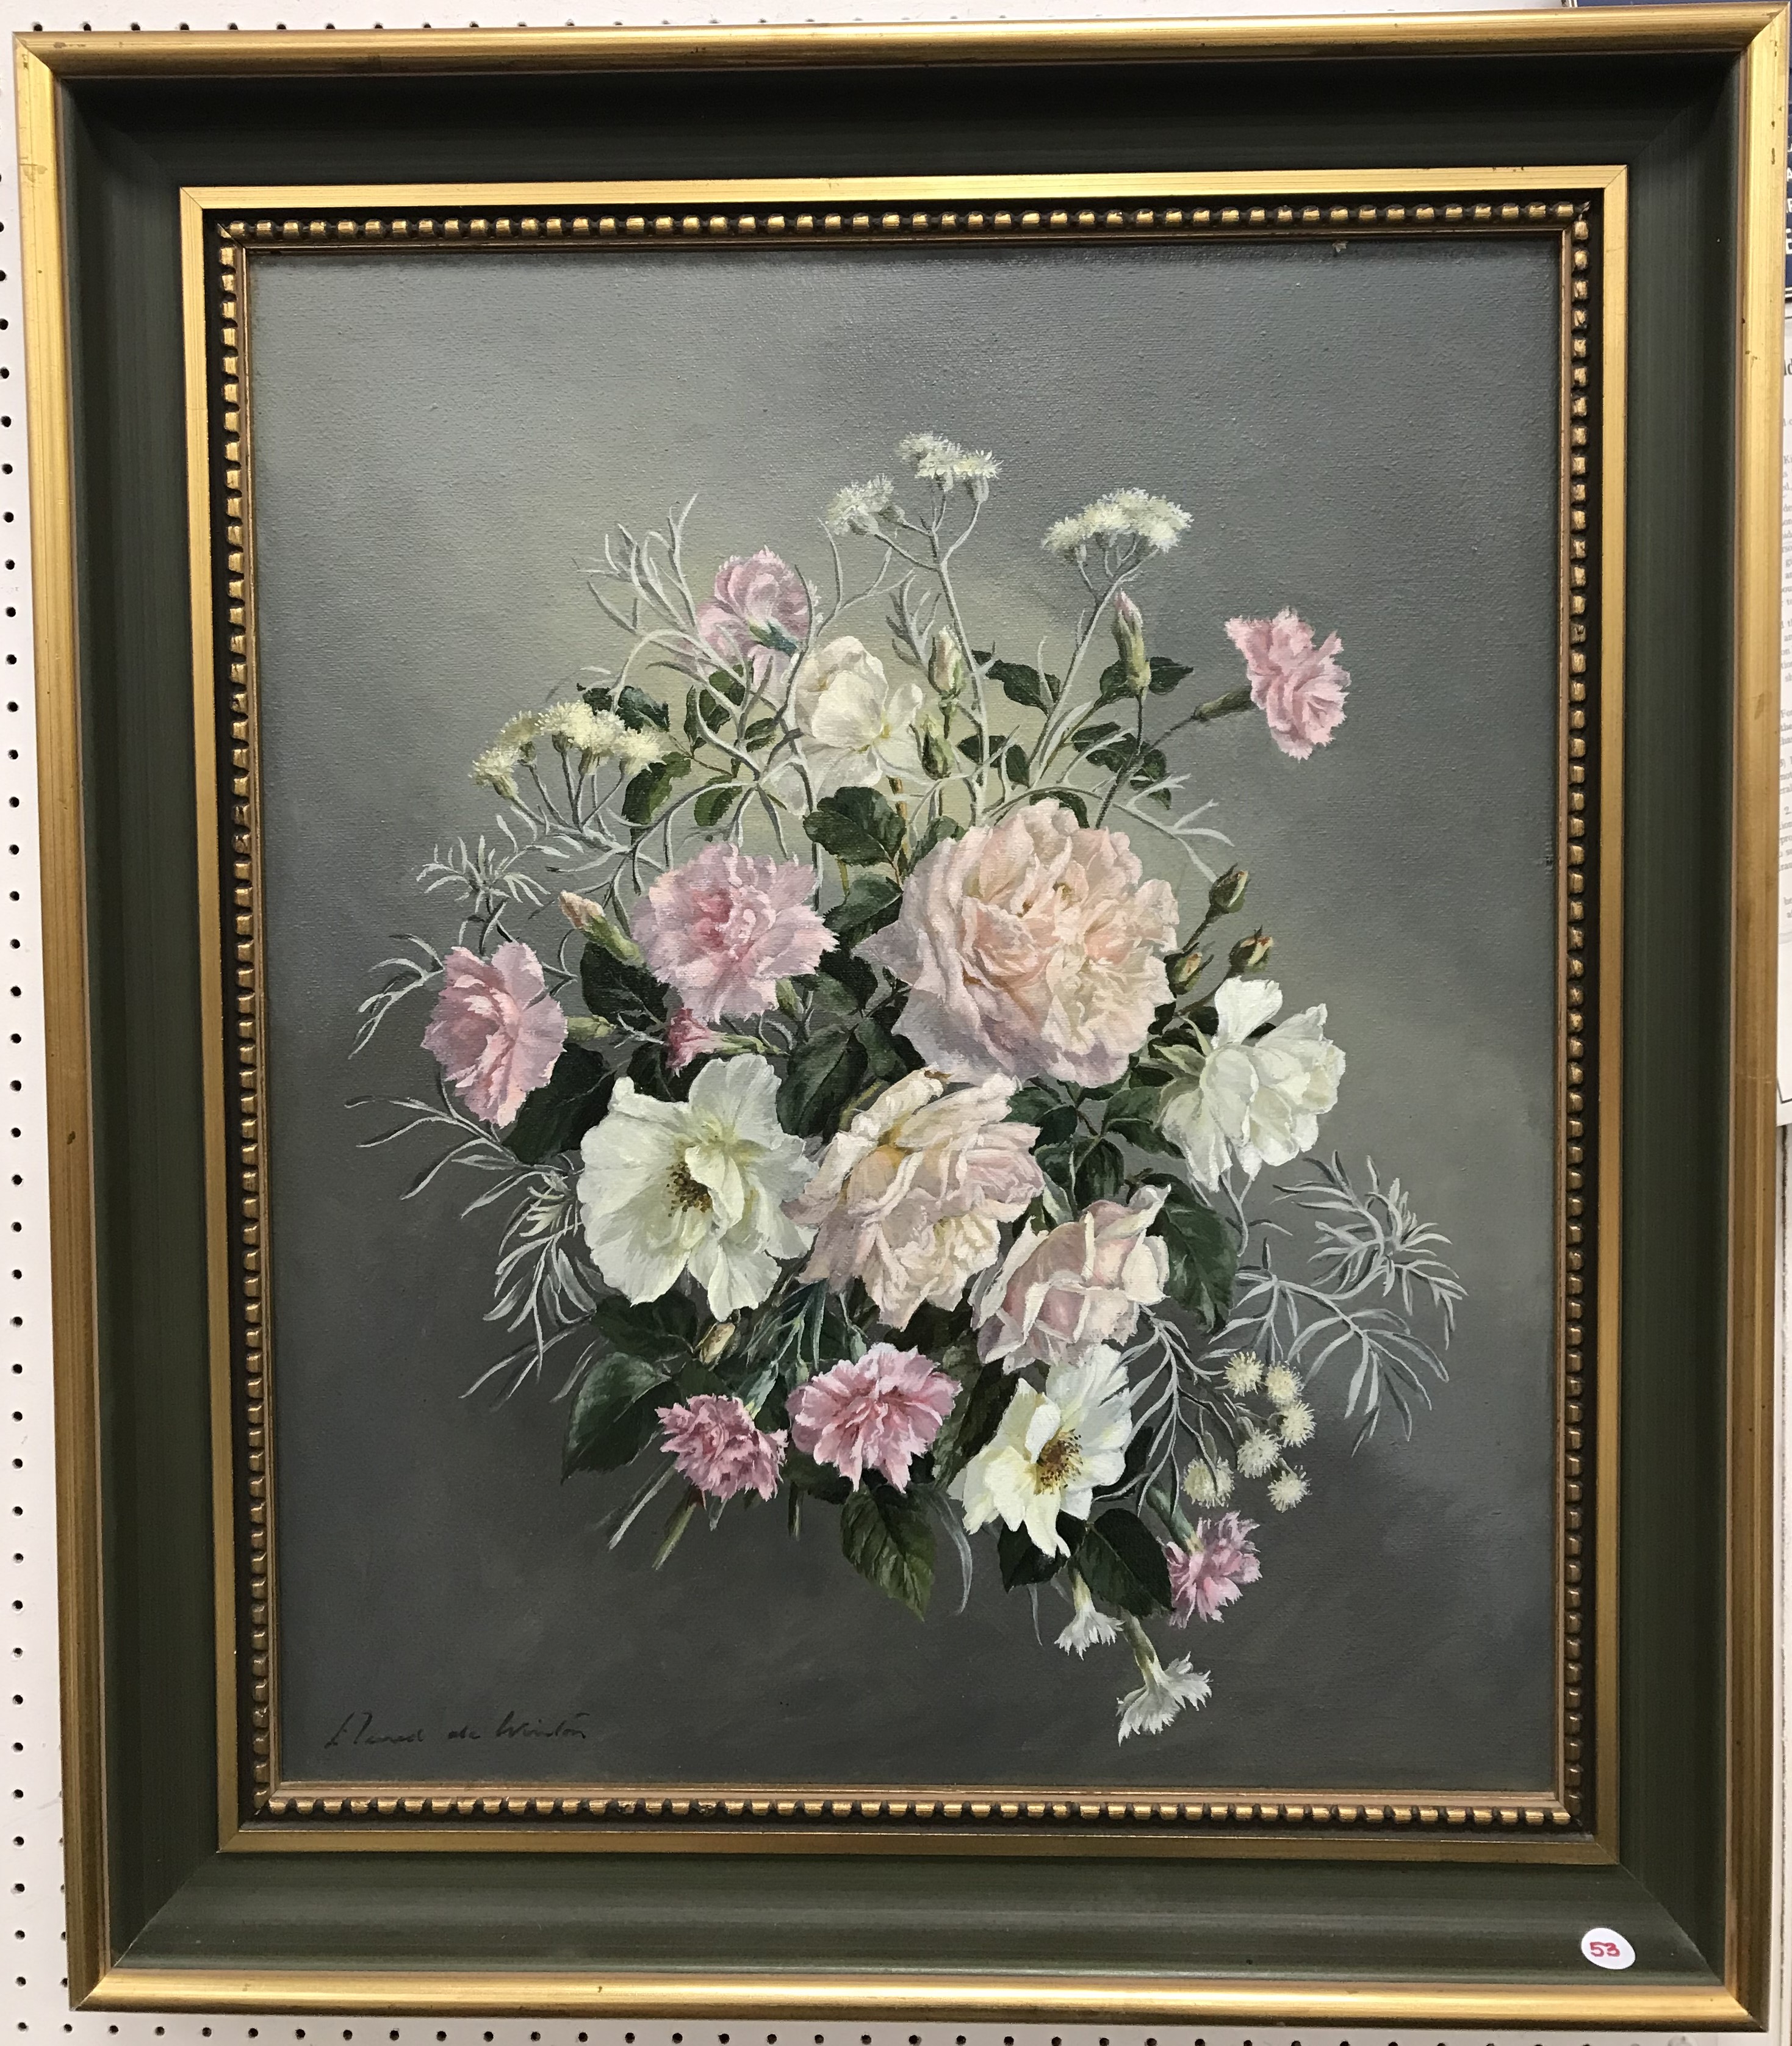 ELENED DE WINTON "Carnations and roses" a still life study, oil on canvas, signed lower left, - Image 2 of 2